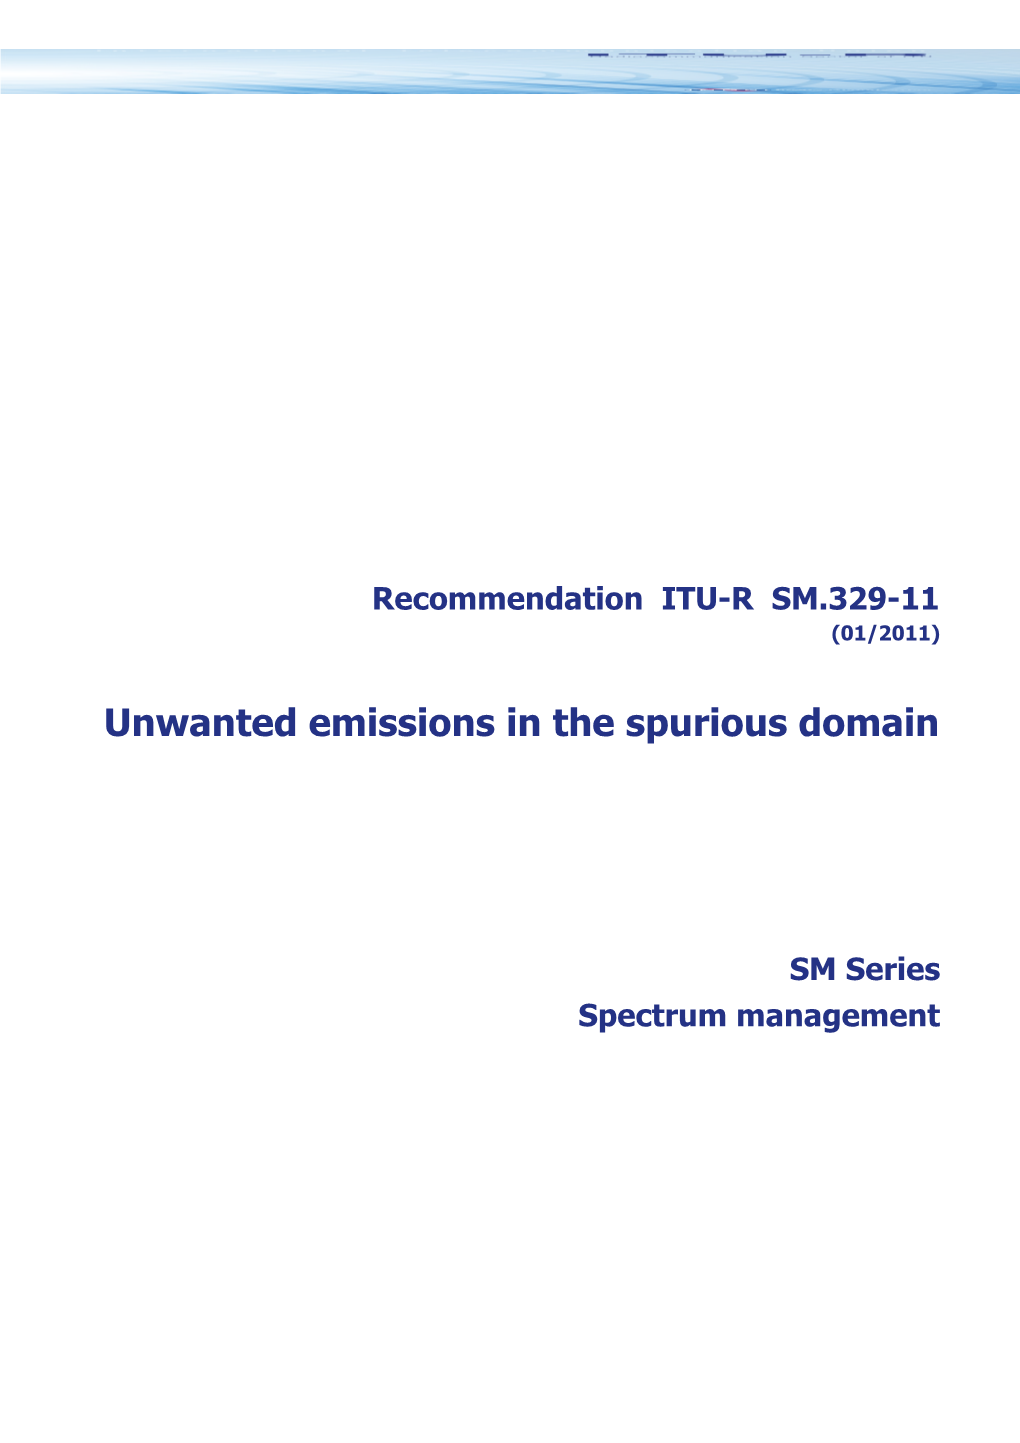 RECOMMENDATION ITU-R SM.329-11 - Unwanted Emissions in the Spurious Domain*